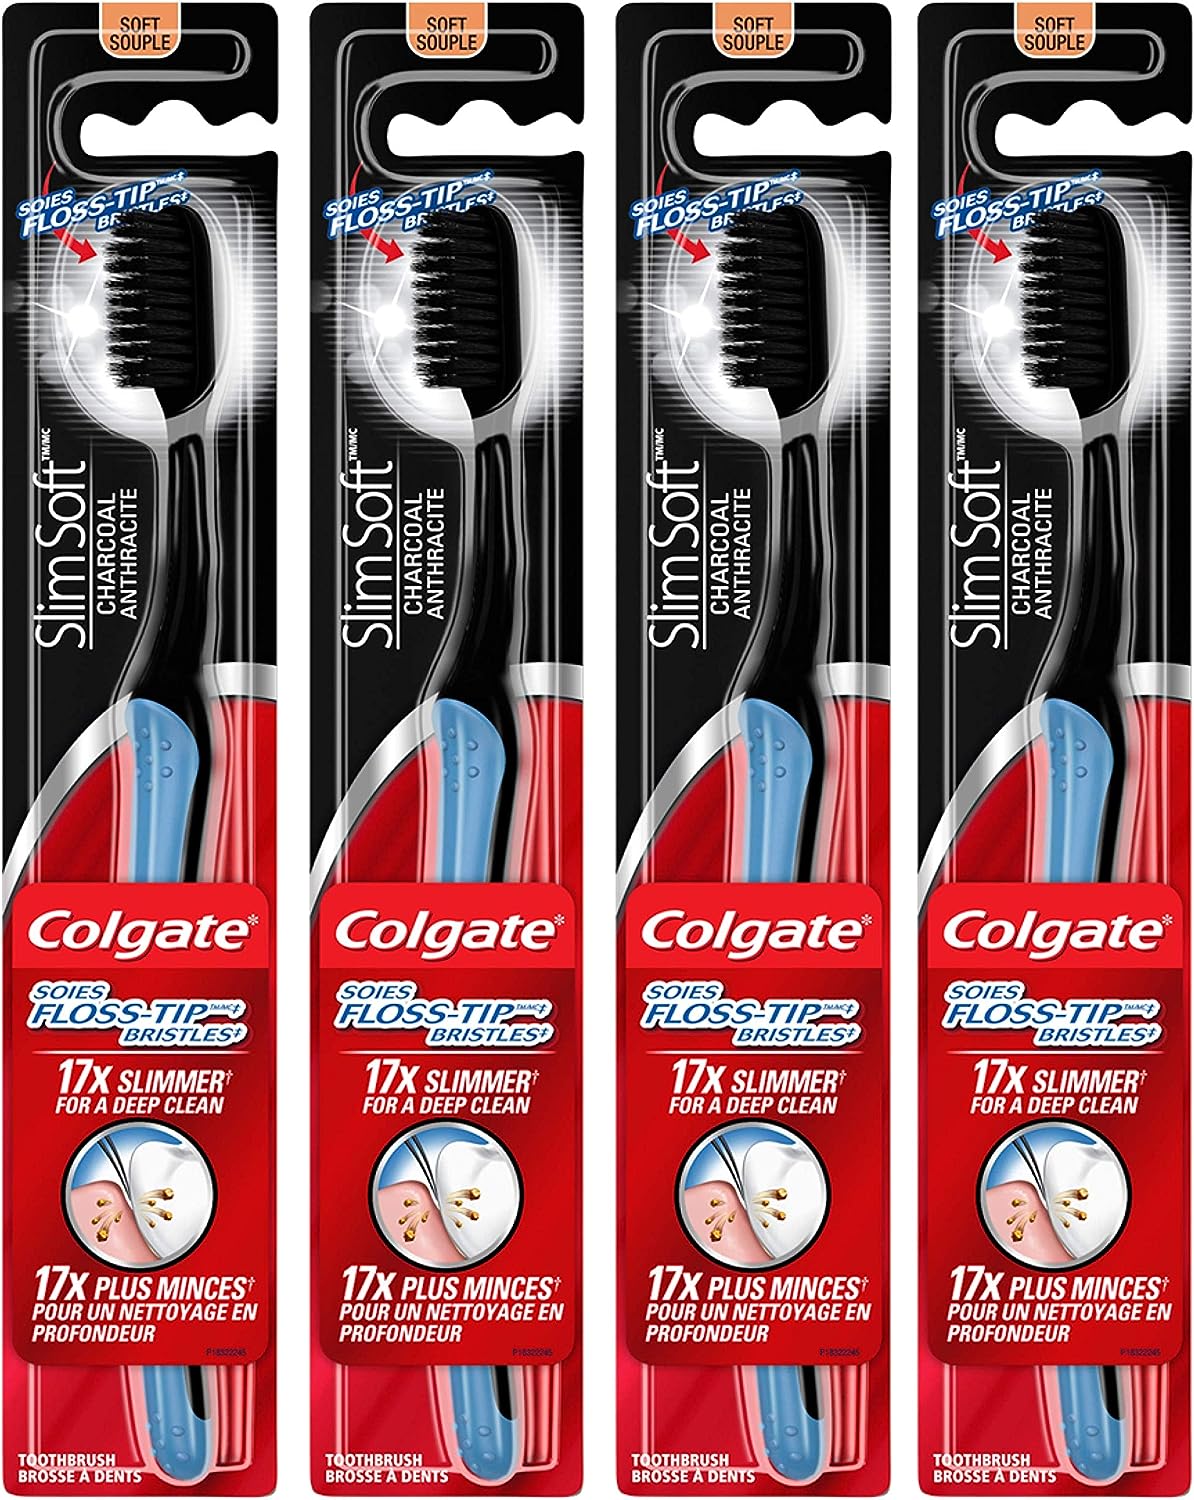 Colgate Slimsoft Floss-Tip Charcoal Toothbrush, Soft (4 Count)